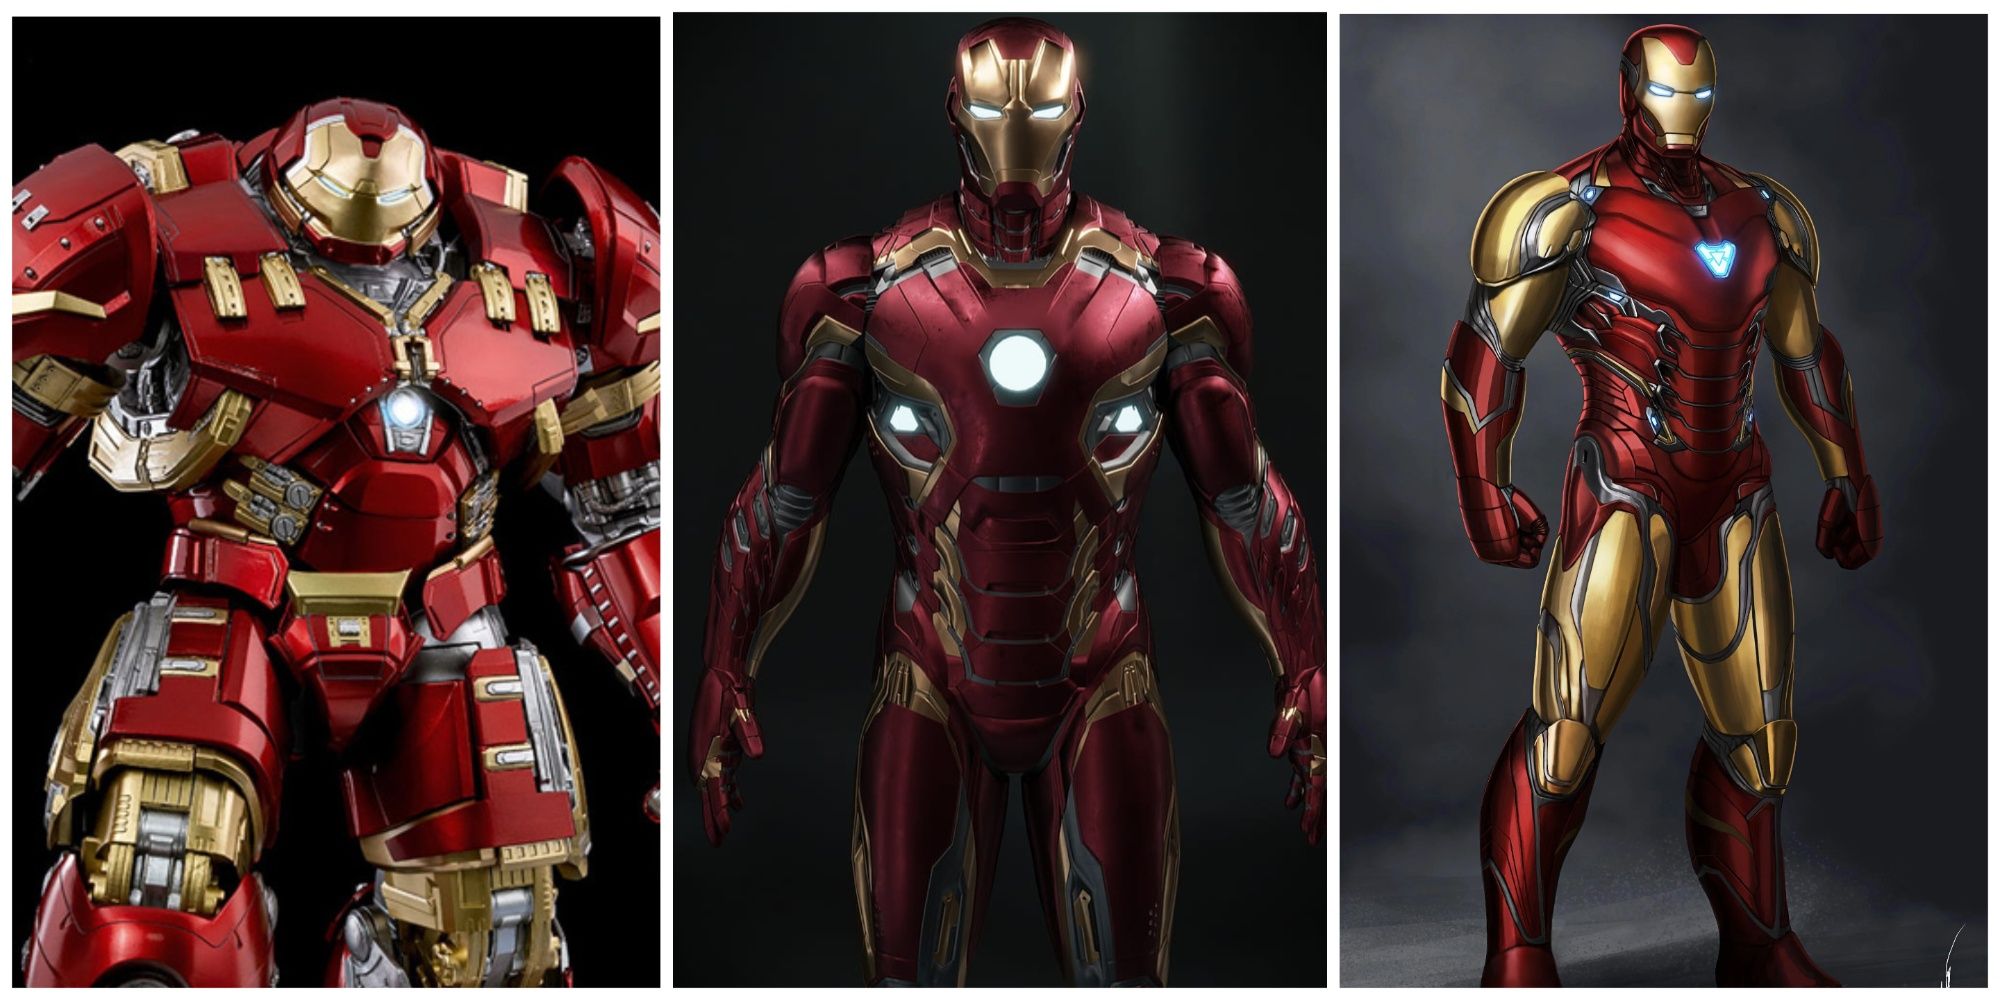 Top 10 Iron Man Suits In The MCU